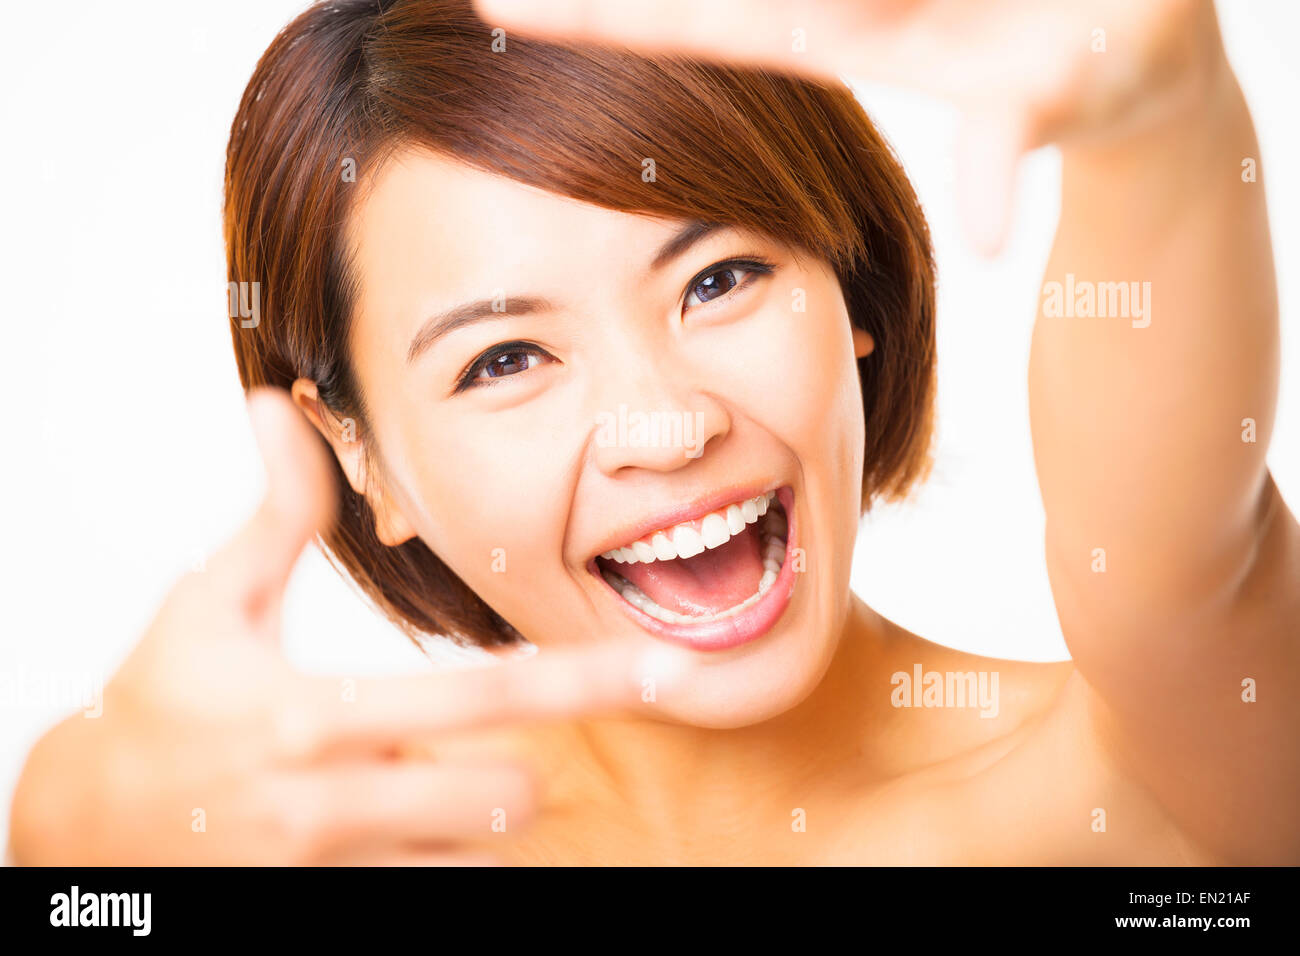 happy young Woman showing frame finger sign Stock Photo